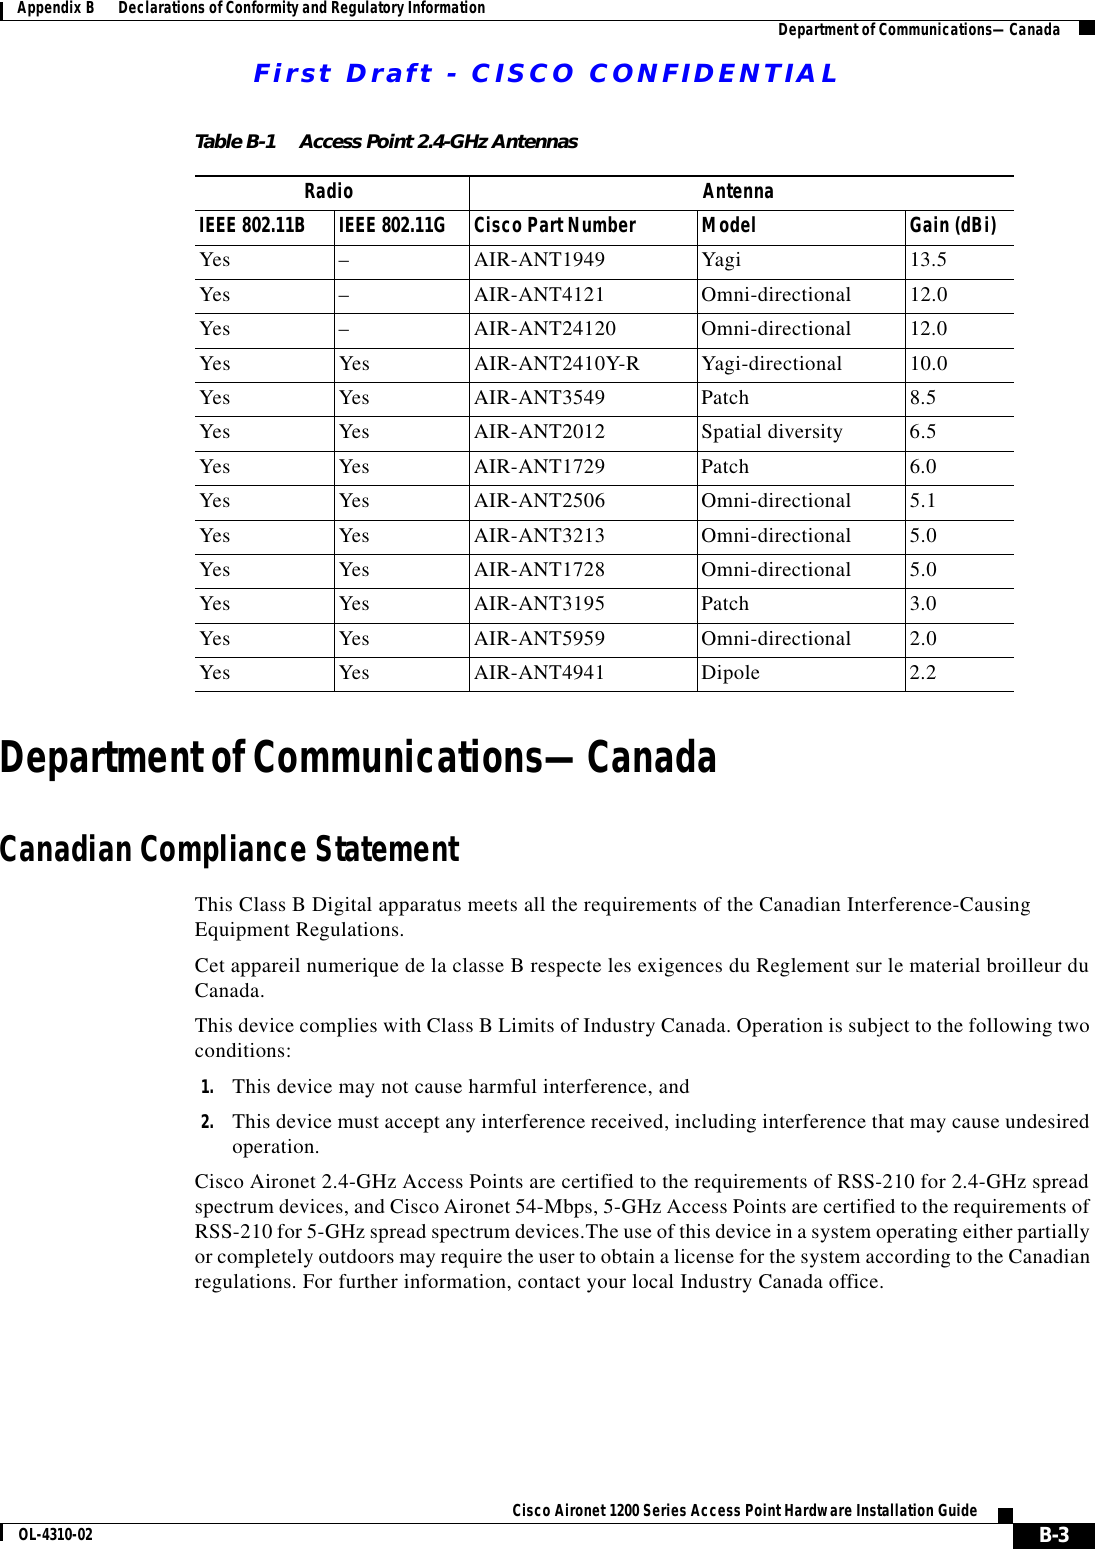 First Draft - CISCO CONFIDENTIALB-3Cisco Aironet 1200 Series Access Point Hardware Installation GuideOL-4310-02Appendix B      Declarations of Conformity and Regulatory Information Department of Communications—CanadaDepartment of Communications—CanadaCanadian Compliance StatementThis Class B Digital apparatus meets all the requirements of the Canadian Interference-Causing Equipment Regulations.Cet appareil numerique de la classe B respecte les exigences du Reglement sur le material broilleur du Canada.This device complies with Class B Limits of Industry Canada. Operation is subject to the following two conditions:1. This device may not cause harmful interference, and2. This device must accept any interference received, including interference that may cause undesired operation.Cisco Aironet 2.4-GHz Access Points are certified to the requirements of RSS-210 for 2.4-GHz spread spectrum devices, and Cisco Aironet 54-Mbps, 5-GHz Access Points are certified to the requirements of RSS-210 for 5-GHz spread spectrum devices.The use of this device in a system operating either partially or completely outdoors may require the user to obtain a license for the system according to the Canadian regulations. For further information, contact your local Industry Canada office.Table B-1 Access Point 2.4-GHz AntennasRadio AntennaIEEE 802.11B IEEE 802.11G Cisco Part Number Model Gain (dBi)Yes –AIR-ANT1949 Yagi 13.5Yes –AIR-ANT4121 Omni-directional 12.0Yes –AIR-ANT24120 Omni-directional 12.0Yes Yes AIR-ANT2410Y-R Yagi-directional 10.0Yes Yes AIR-ANT3549 Patch 8.5Yes Yes AIR-ANT2012 Spatial diversity 6.5Yes Yes AIR-ANT1729 Patch 6.0Yes Yes AIR-ANT2506 Omni-directional 5.1Yes Yes AIR-ANT3213 Omni-directional 5.0Yes Yes AIR-ANT1728 Omni-directional 5.0Yes Yes AIR-ANT3195 Patch 3.0Yes Yes AIR-ANT5959 Omni-directional 2.0Yes Yes AIR-ANT4941 Dipole 2.2